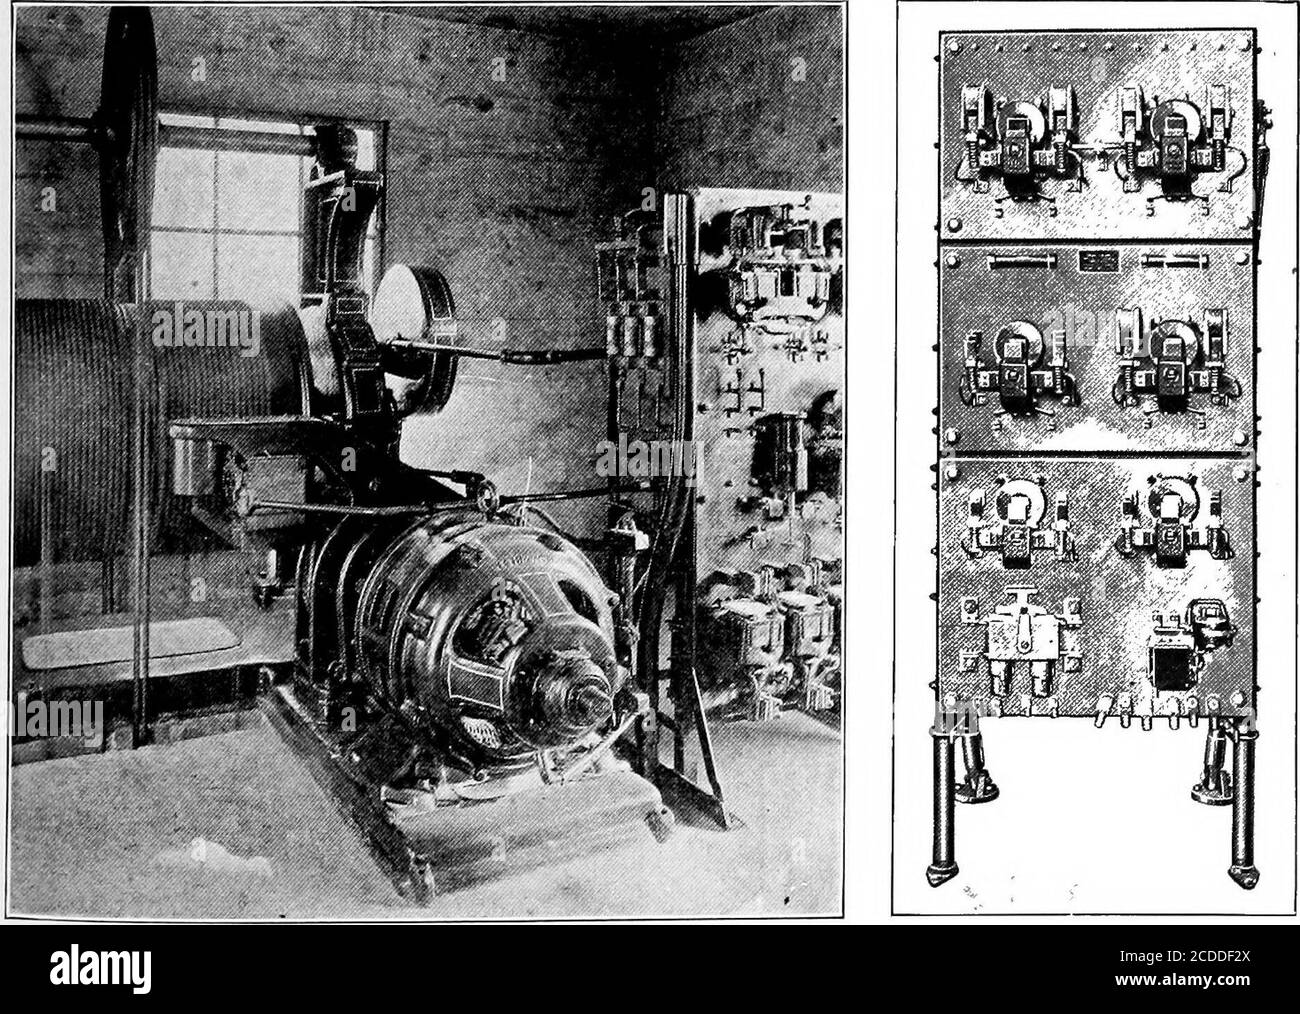 . Material handling cyclopedia; a reference book covering definitions, descriptions, illustrations and methods of use of material handling machines employed in industry . Westinghouse Elevator Motors and Control IS. 25 H. P. Slip Ring A. C. Motor, Type CI Operating 12,000Pound Freight Elevator. Squirrel Cage A. C. Motor, Type CS Operating FreightElevator. SK are designed especially for this service. Some ofthe characteristics fitting them for driving elevators arehigh starting torques, sparkless commutation, ruggedand substantial construction and good performance.They can be furnished in sizes Stock Photo